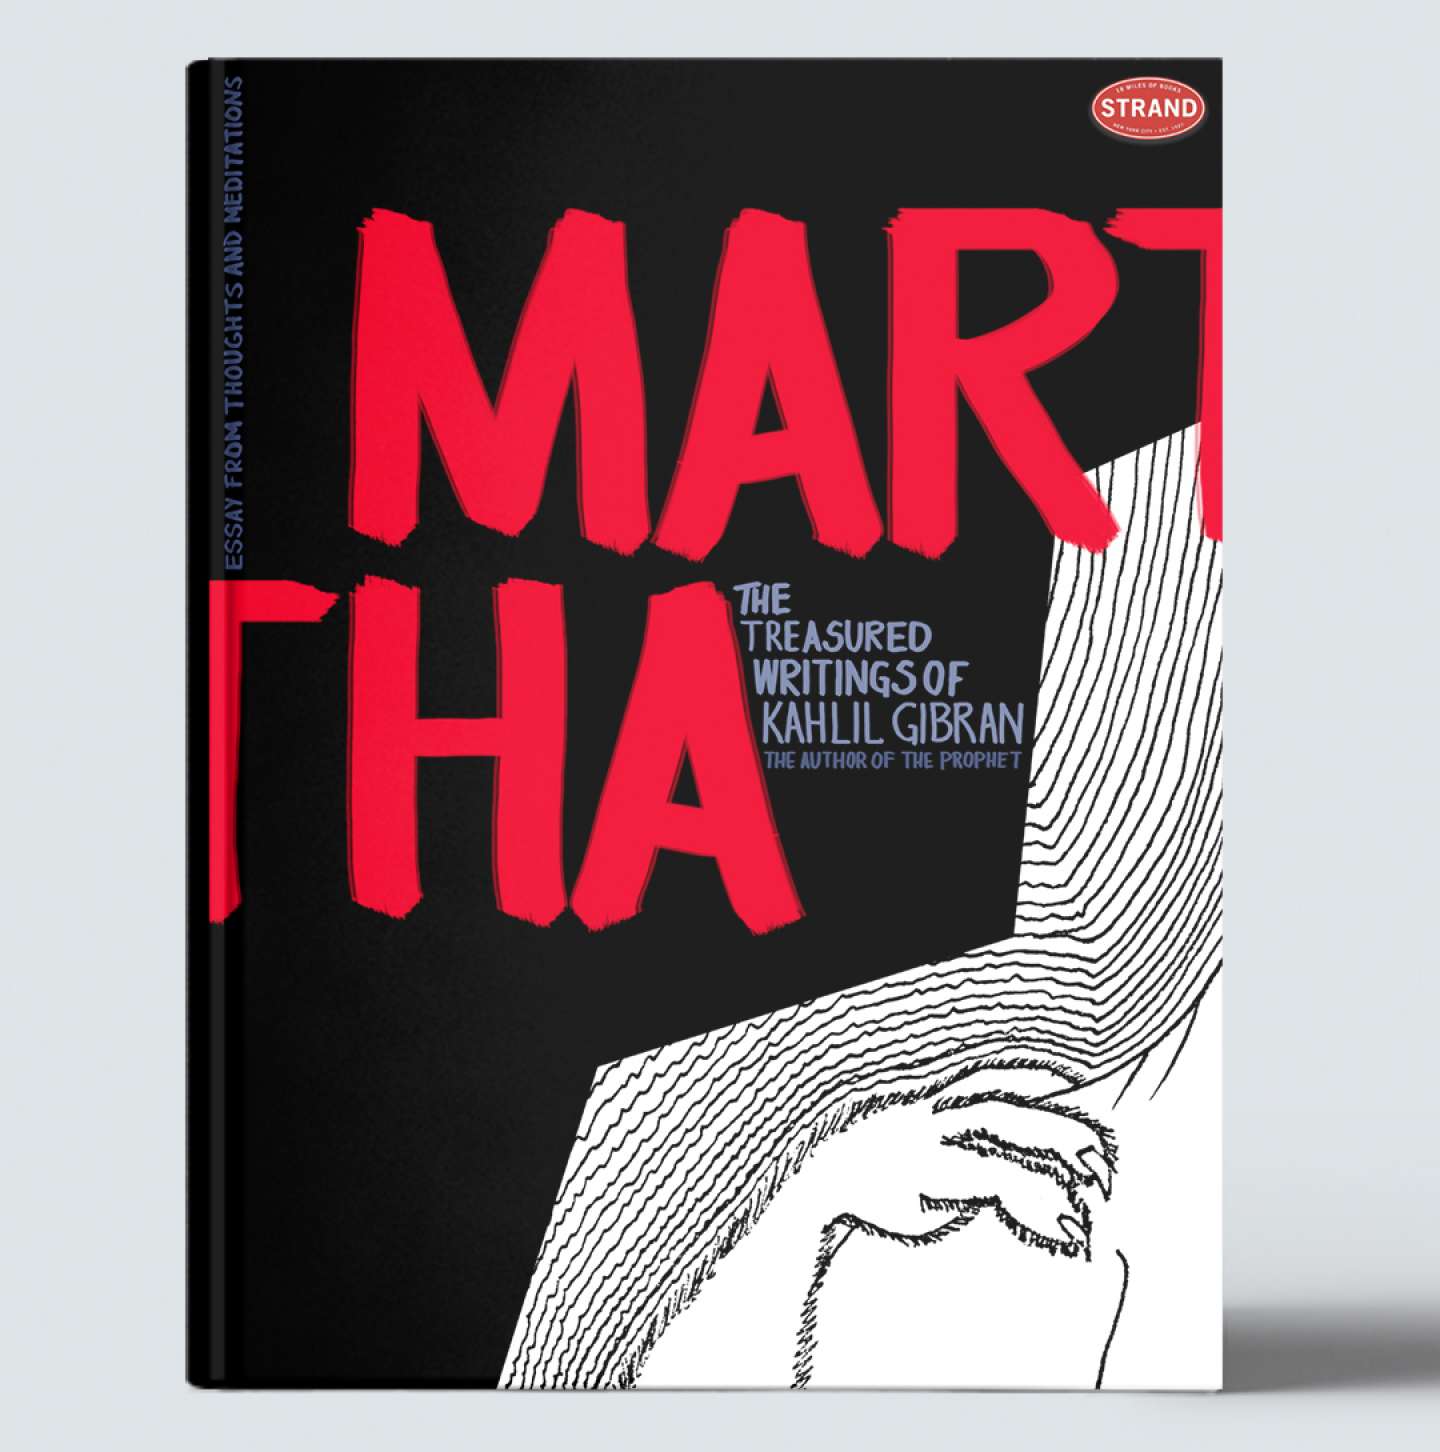 Hand lettered+illustrated Book Covers 